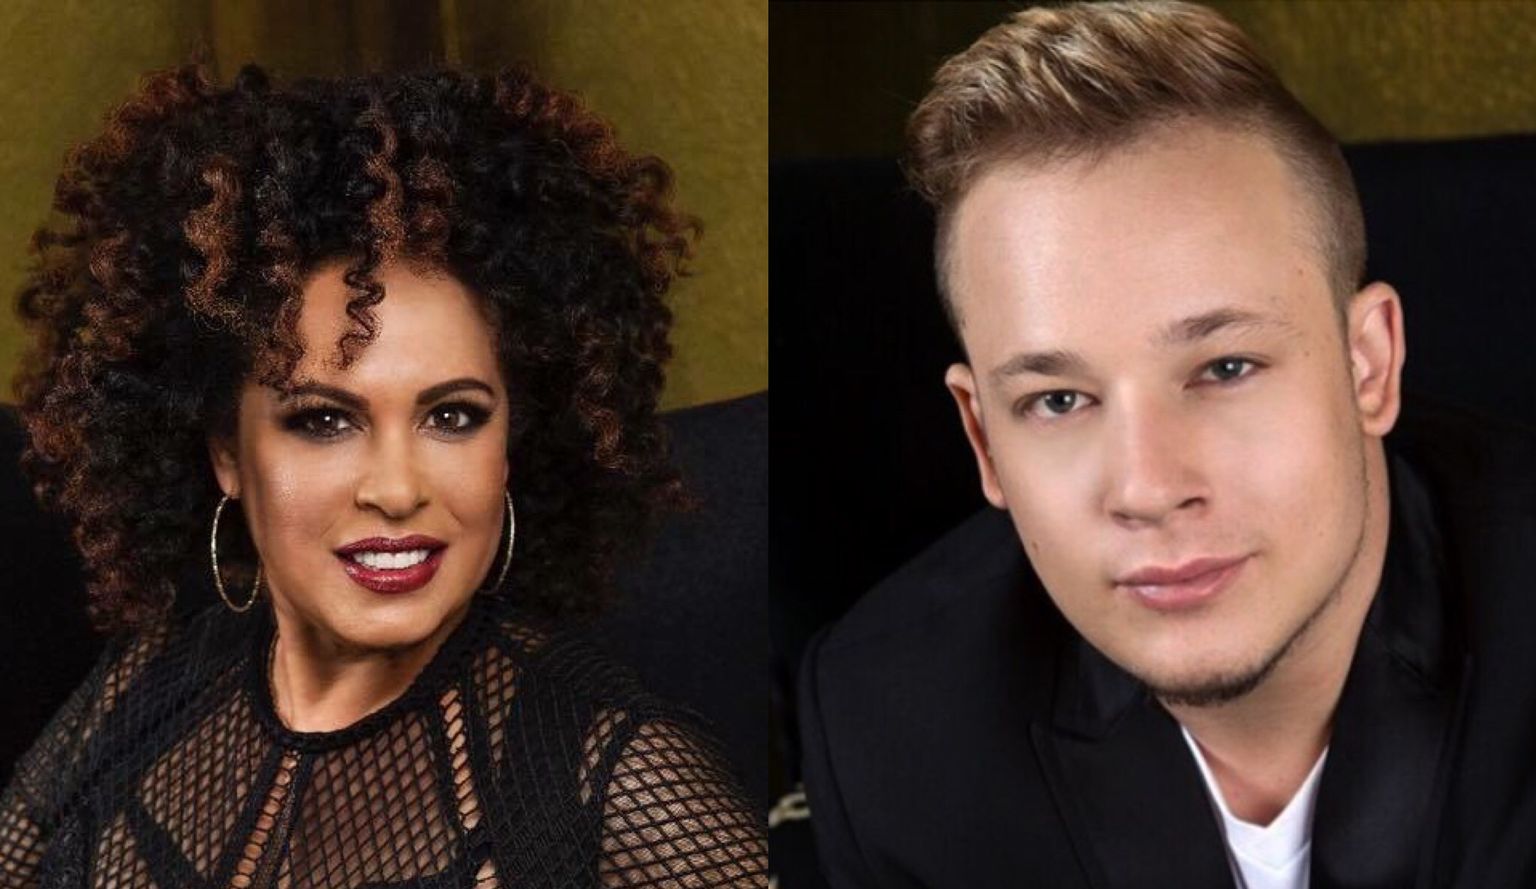 ‘I’ve lost many dear friends to AIDS’: Christine Anu and Greg Gould release new song